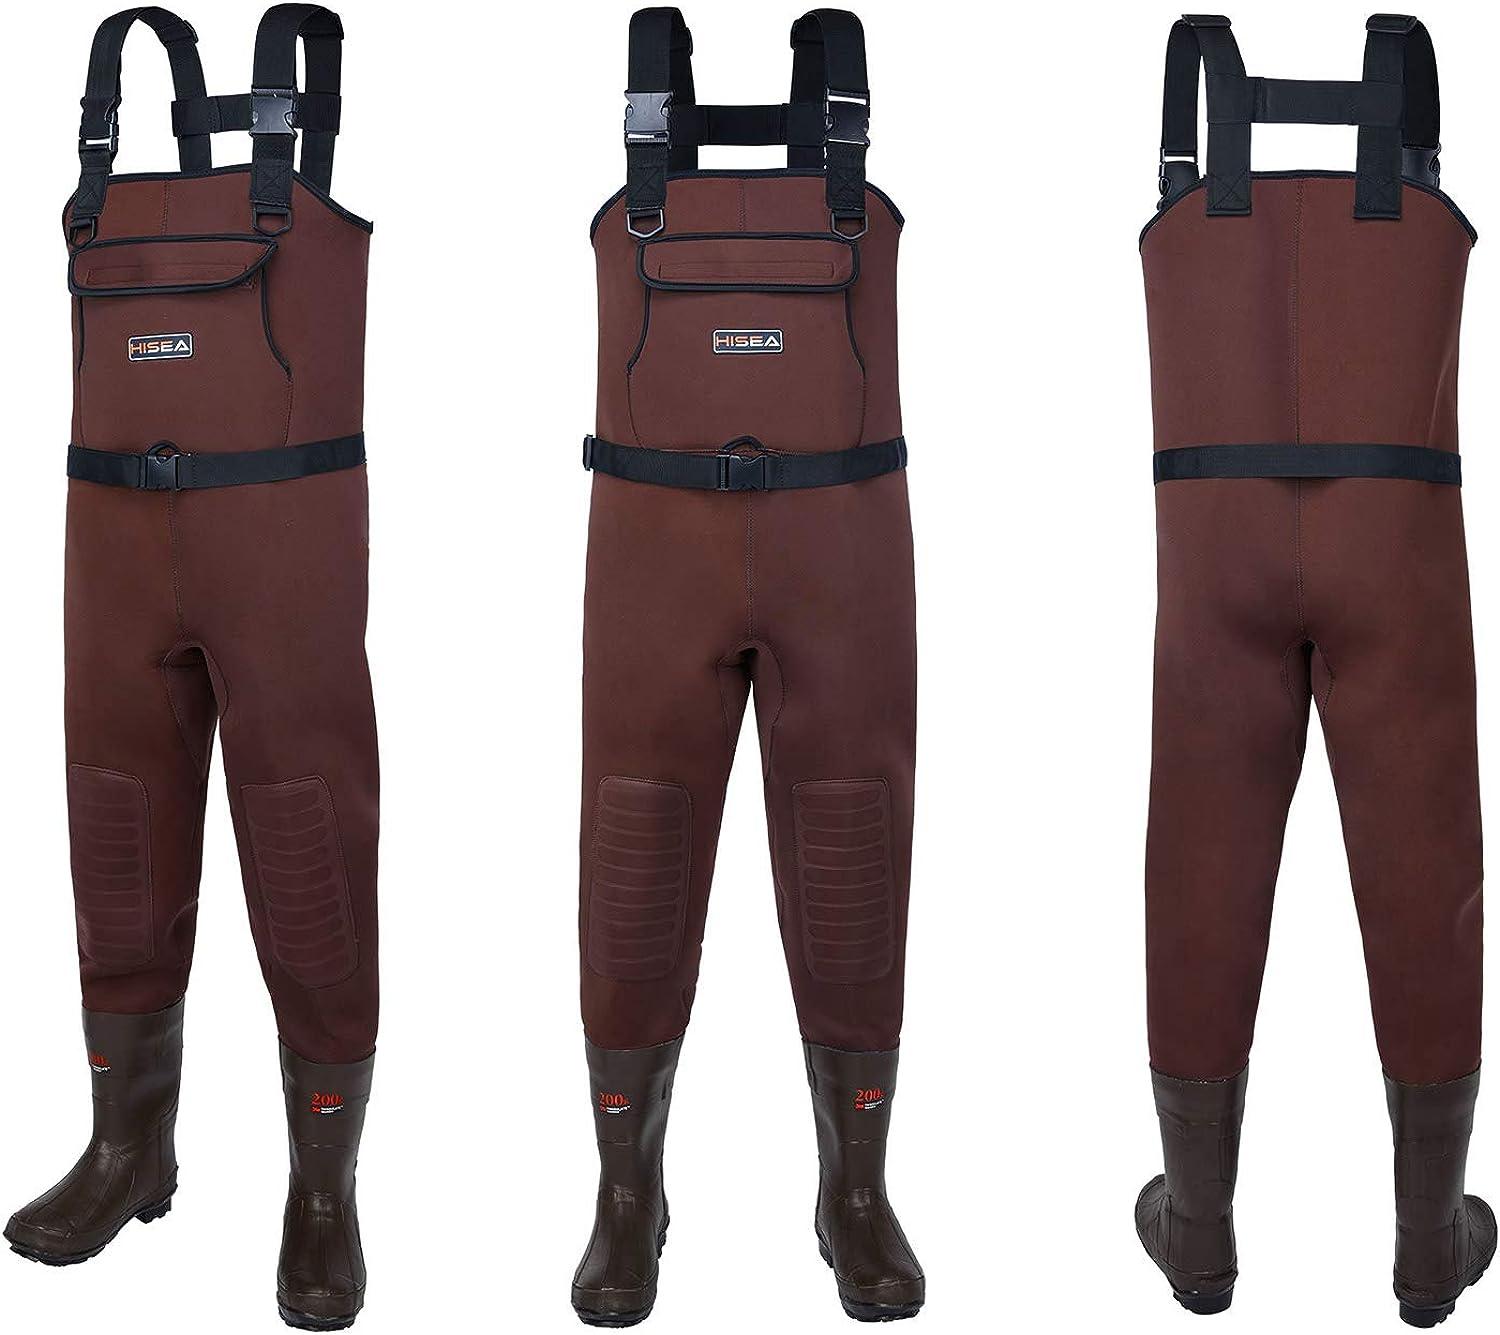 HISEA Neoprene Fishing Chest Waders for Men with Boots Cleated Bootfoot  Waterproof Mens Womens Wader Fishing & Hunting Wader Brown M10/W12